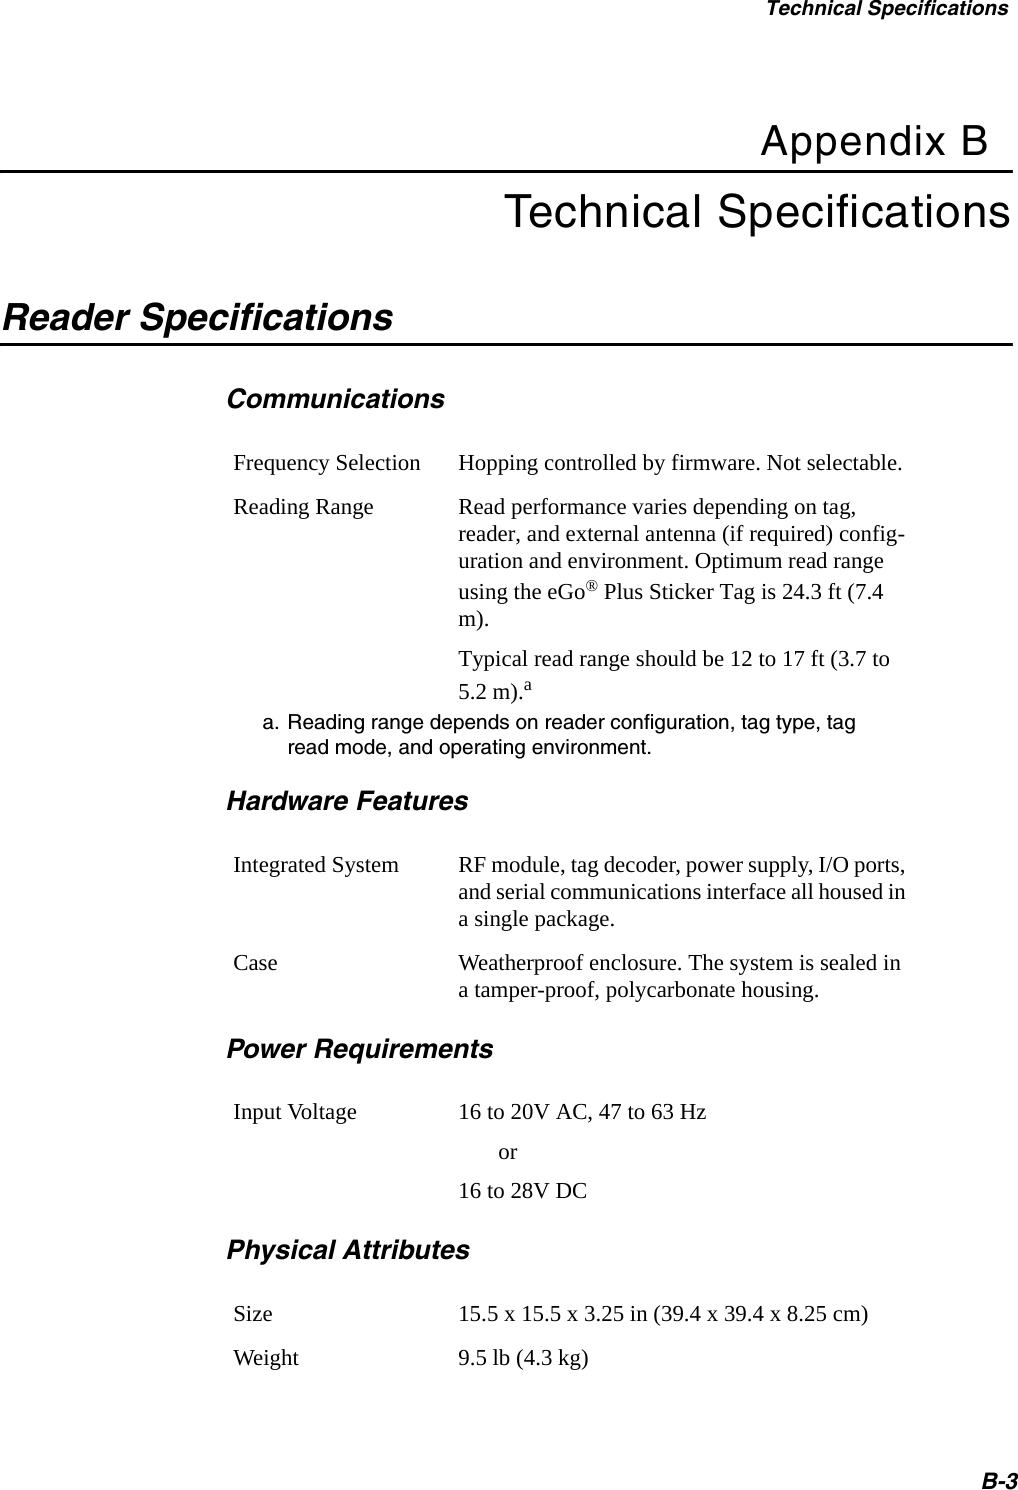 Technical SpecificationsB-3Appendix BTechnical SpecificationsReader Specifications CommunicationsFrequency Selection Hopping controlled by firmware. Not selectable.Reading Range Read performance varies depending on tag, reader, and external antenna (if required) config-uration and environment. Optimum read range using the eGo® Plus Sticker Tag is 24.3 ft (7.4 m).Typical read range should be 12 to 17 ft (3.7 to 5.2 m).aa. Reading range depends on reader configuration, tag type, tag read mode, and operating environment.Hardware FeaturesIntegrated System RF module, tag decoder, power supply, I/O ports, and serial communications interface all housed in a single package.Case Weatherproof enclosure. The system is sealed in a tamper-proof, polycarbonate housing.Power RequirementsInput Voltage 16 to 20V AC, 47 to 63 Hz       or16 to 28V DCPhysical AttributesSize 15.5 x 15.5 x 3.25 in (39.4 x 39.4 x 8.25 cm)Weight 9.5 lb (4.3 kg)